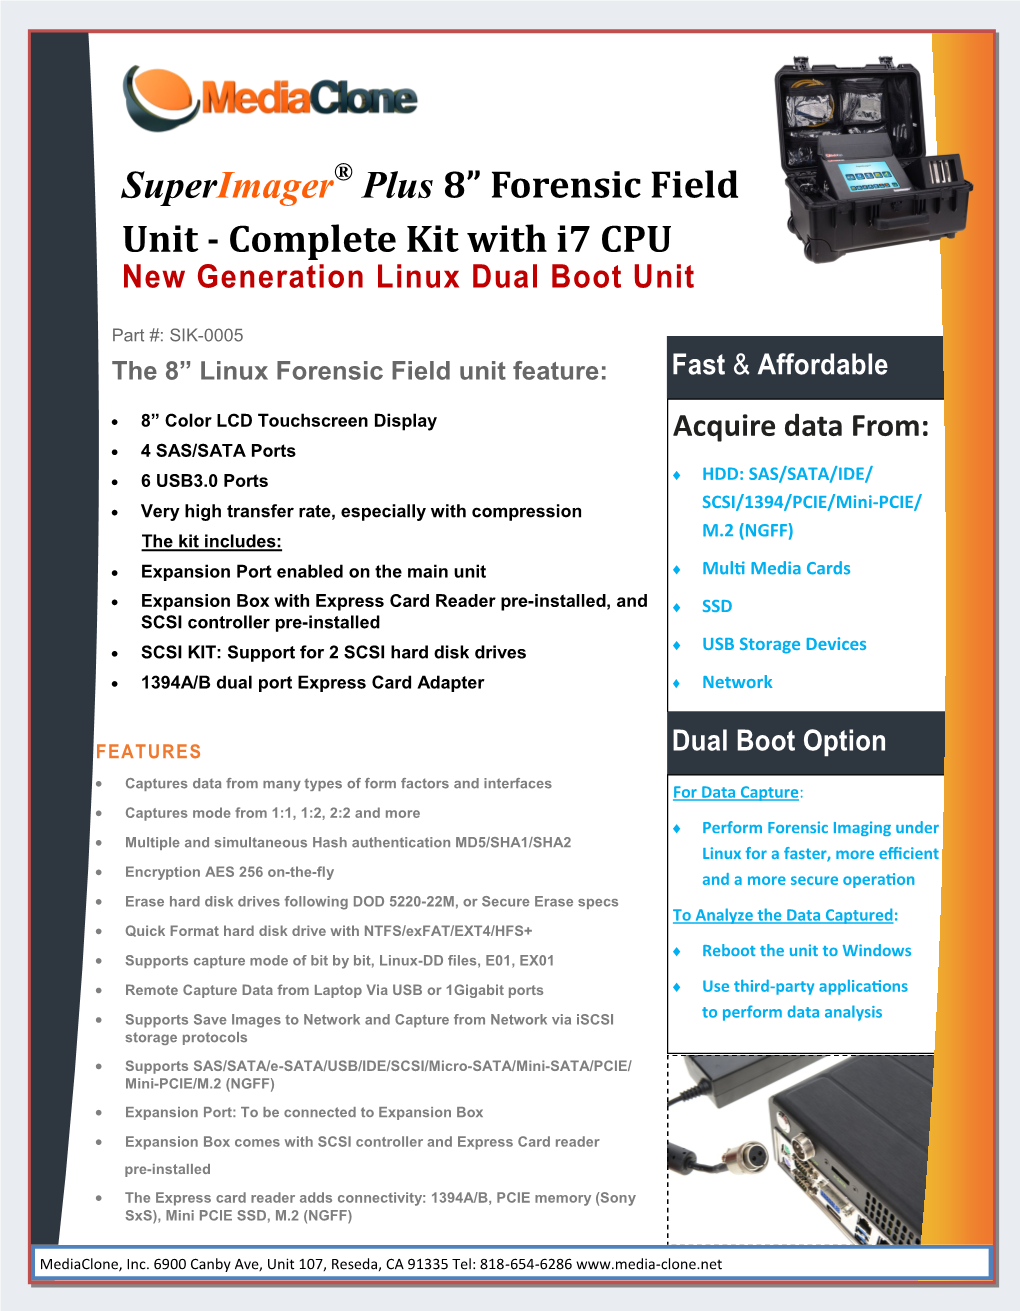 Superimager Plus 8” Forensic Field Unit